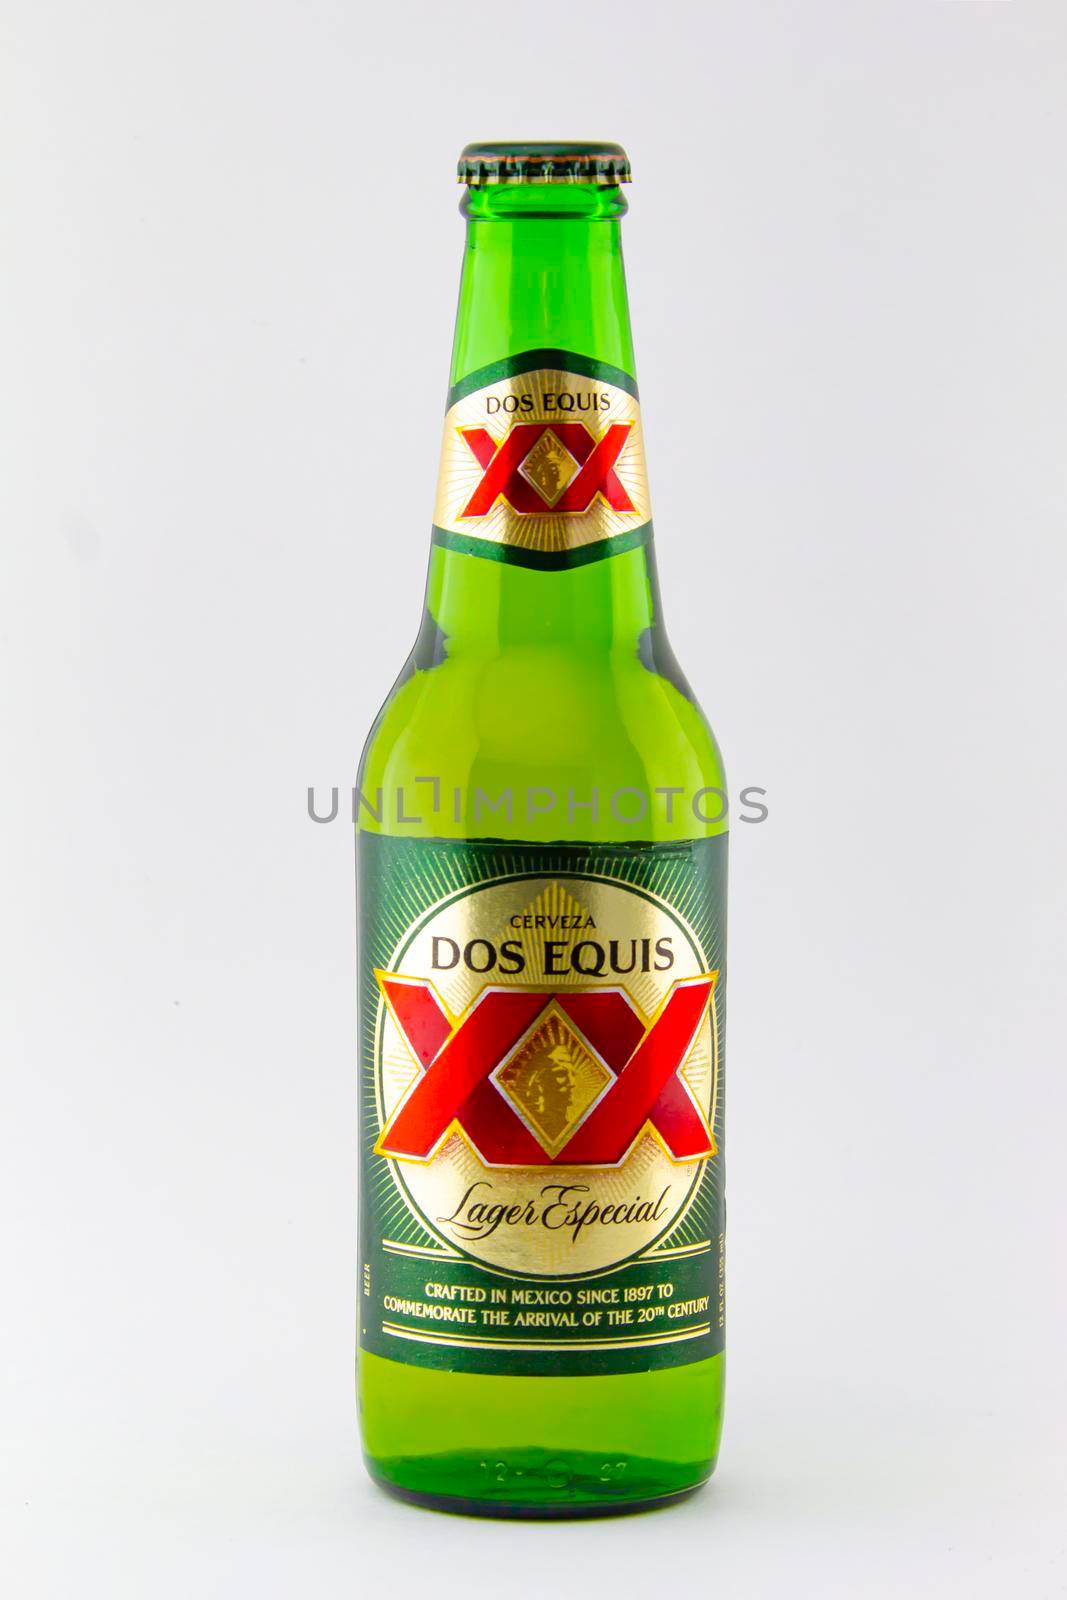 Calgary Alberta, Canada. Feb 15, 2021. A bottle of Dos Equis Lager beer on a white background by oasisamuel